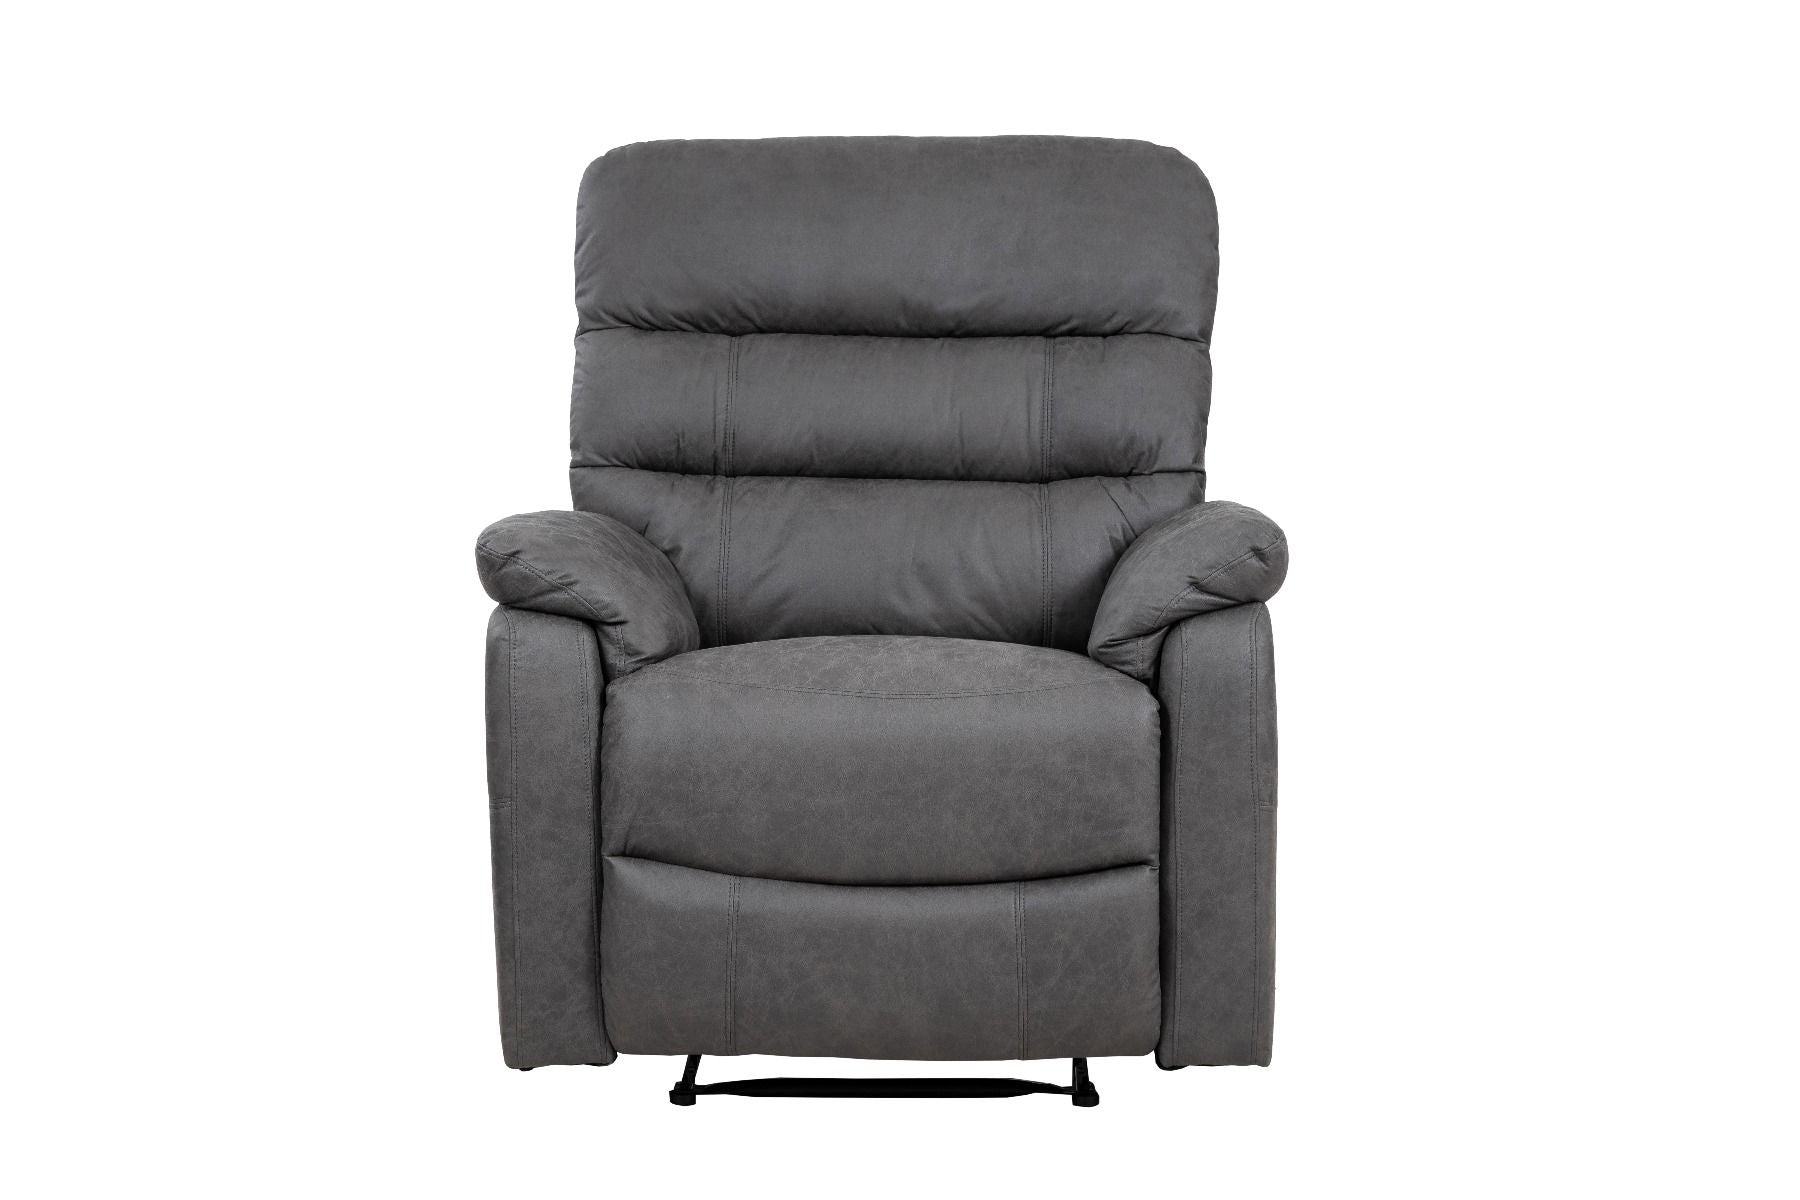 Taylor Recliner Chair-Leather Air-Antique Grey Rub Off